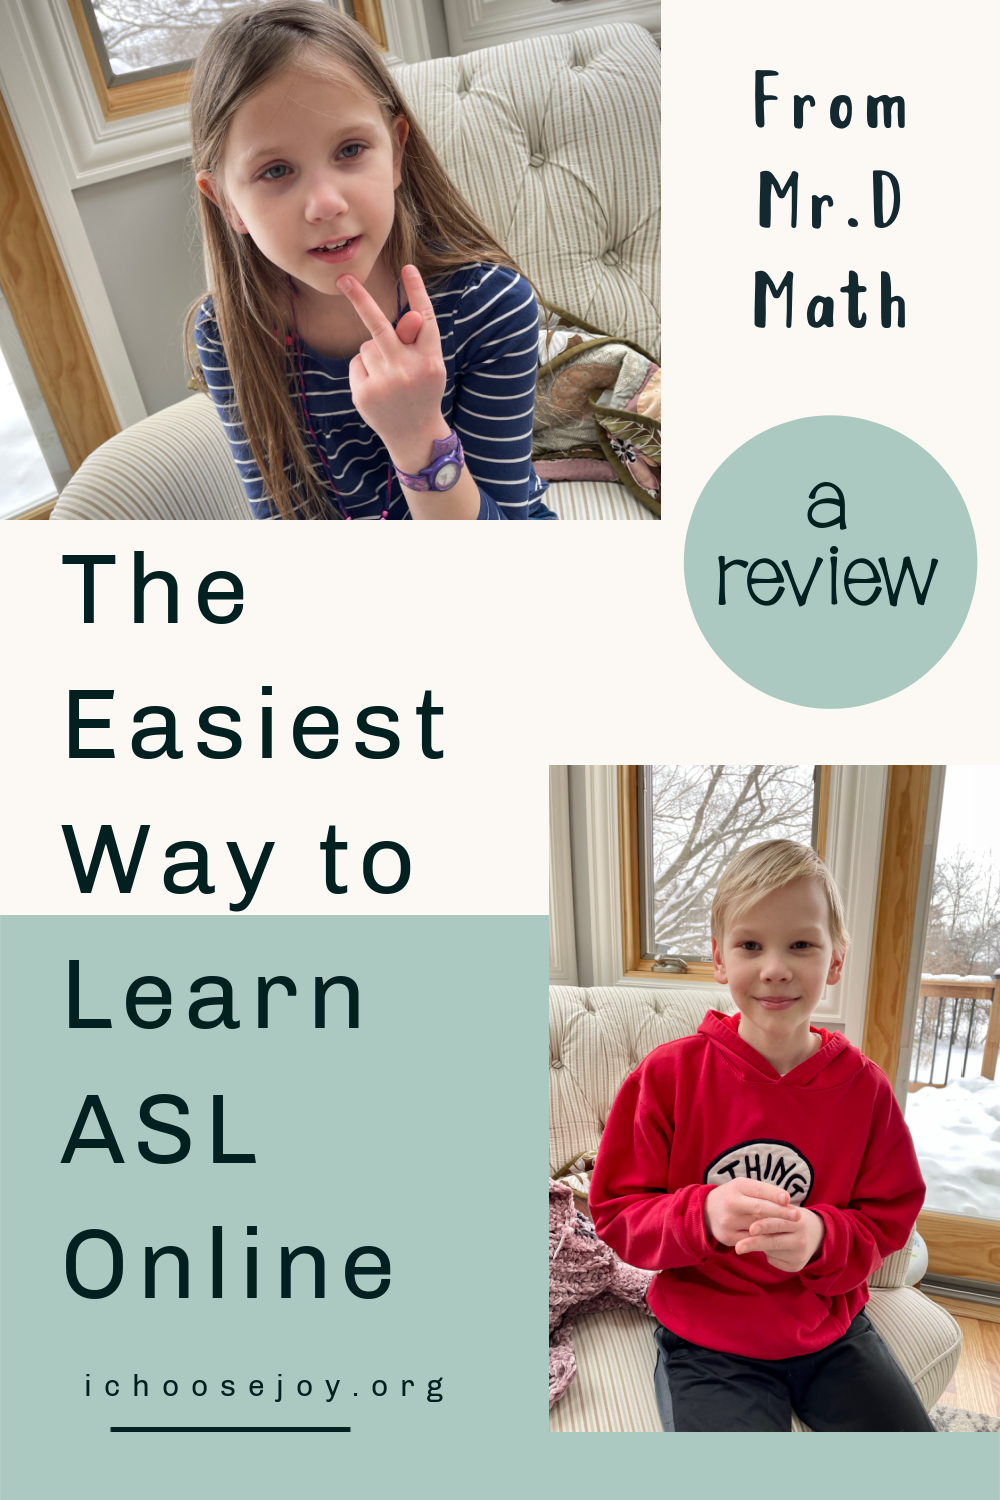 The easiest way to learn ASL online. American Sign Language course at Mr. D Math ASL 1. Review from ichoosejoy.org. #curriculumreview #homeschool #aslcourse